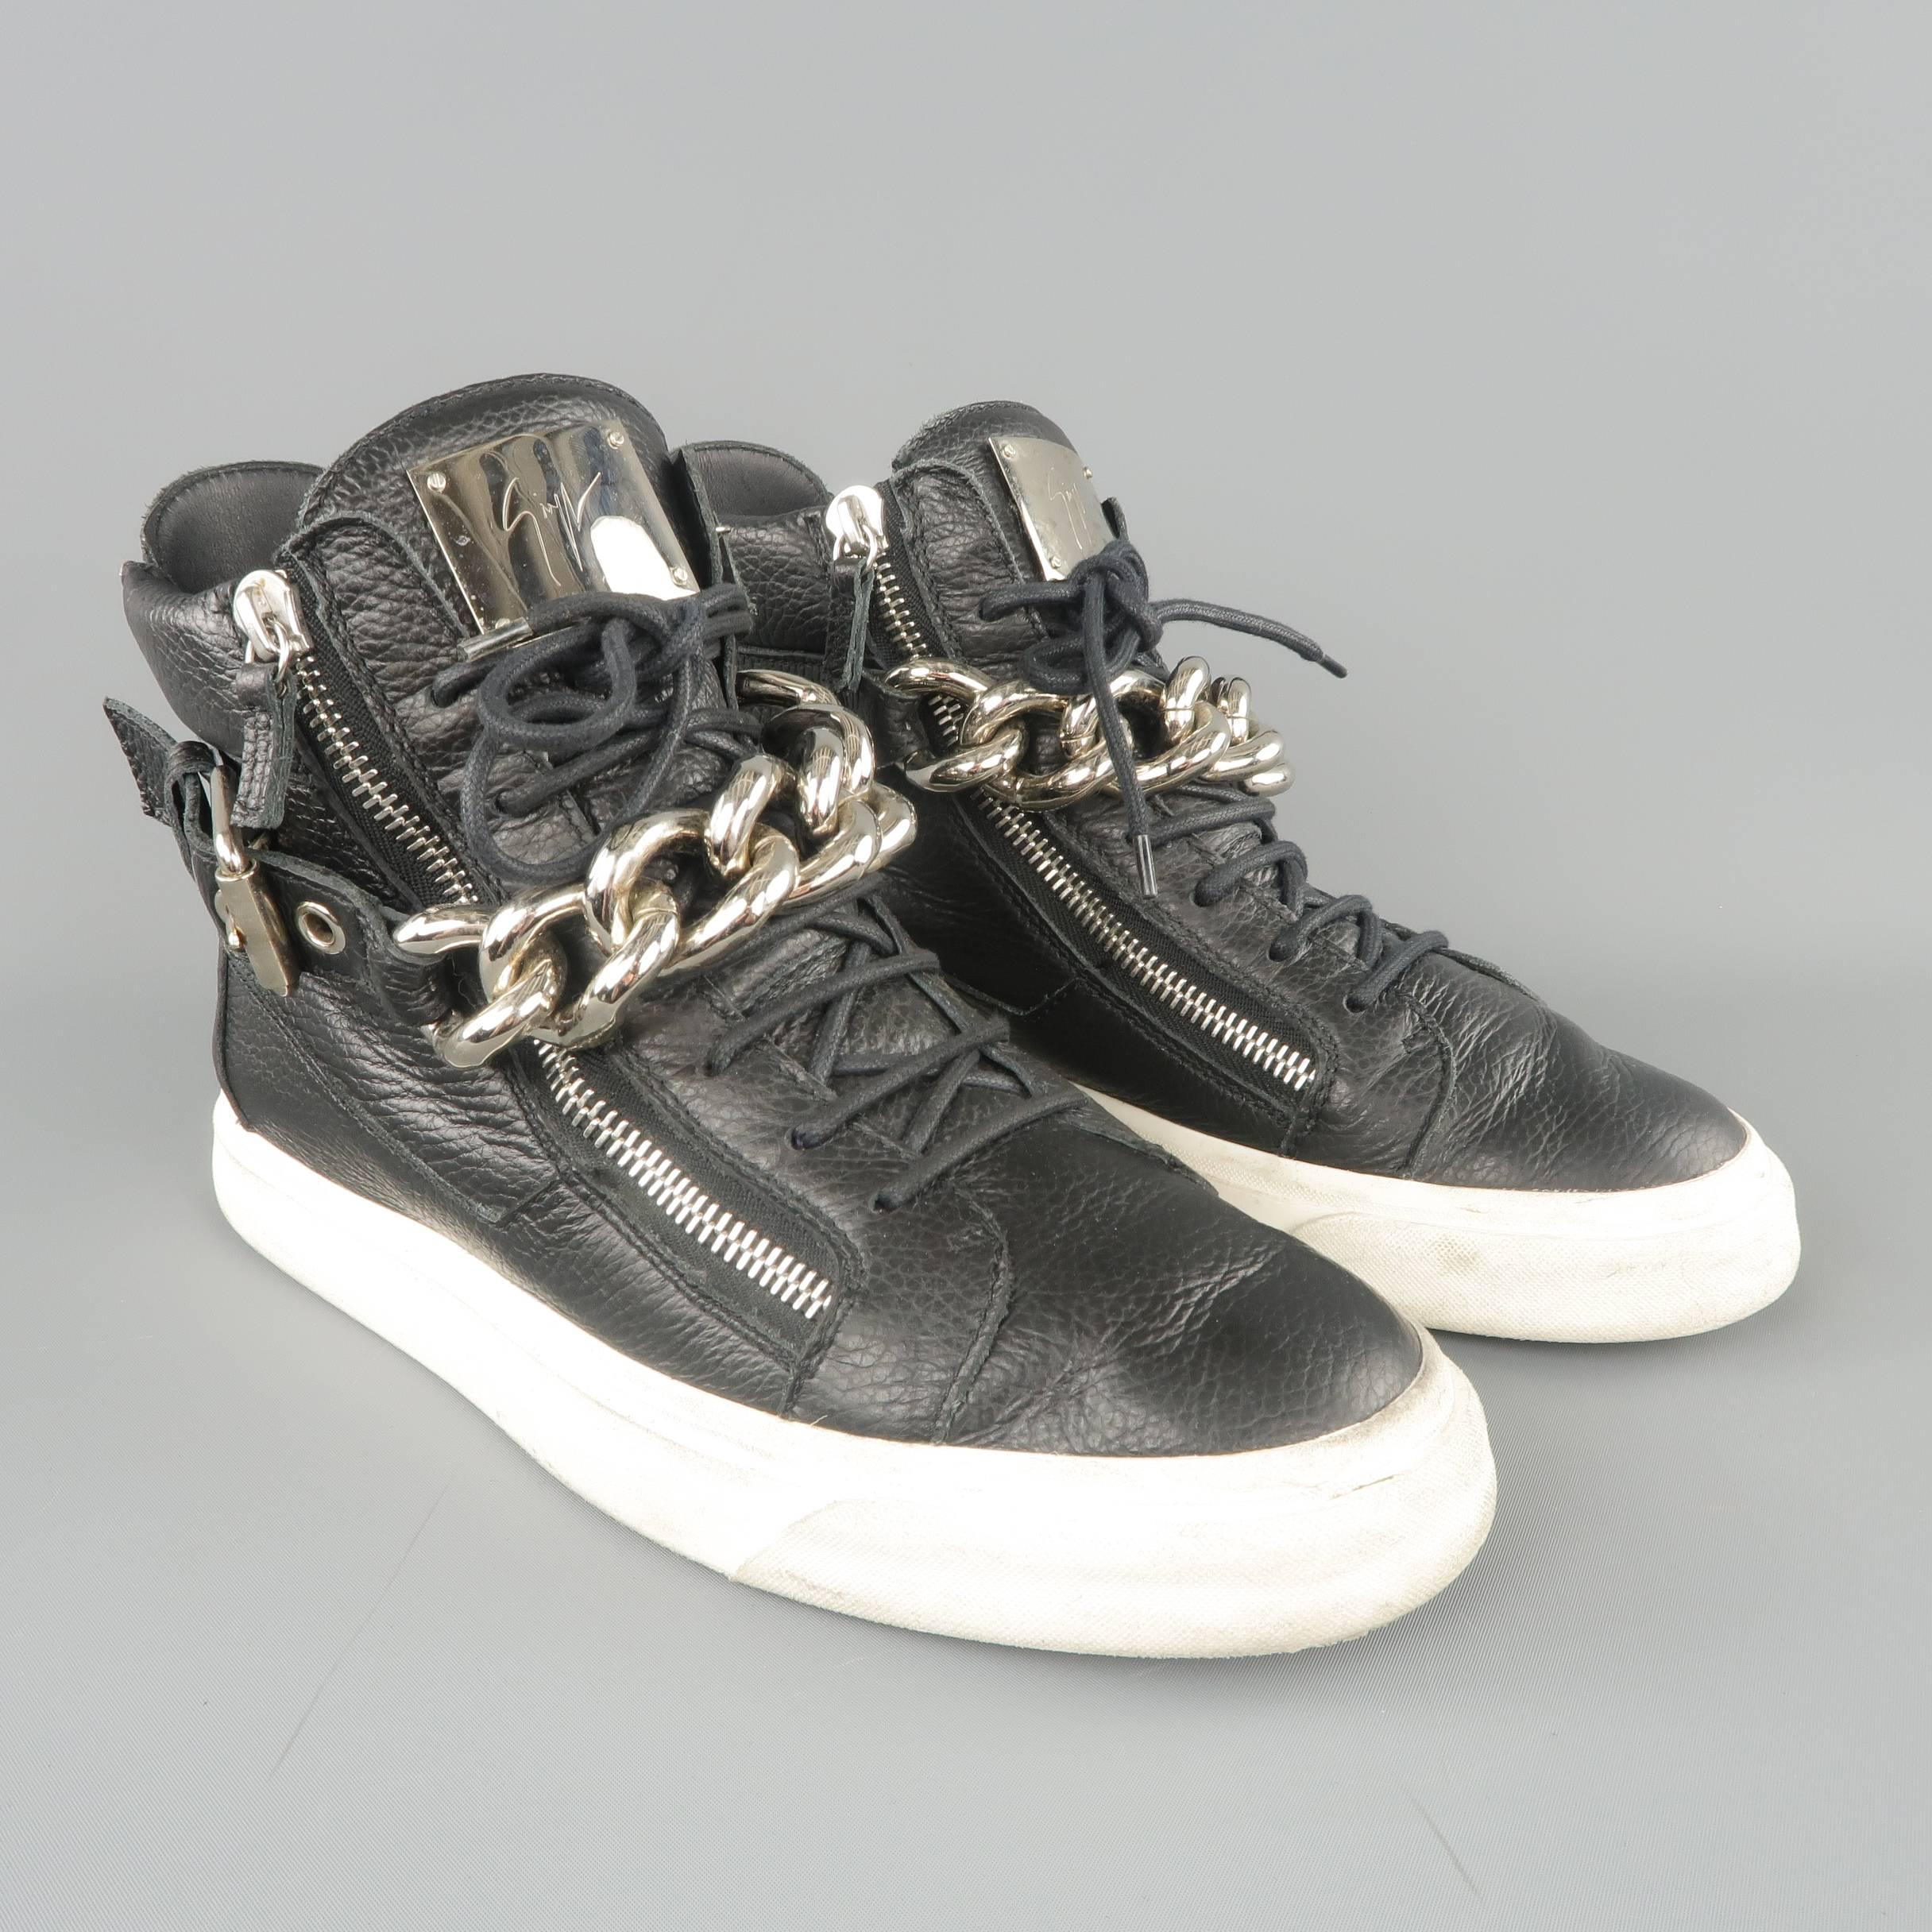 GIUSEPPE ZANOTTI Sneakers 10 Black Textured Leather Silver Chain Bangle High Top 1